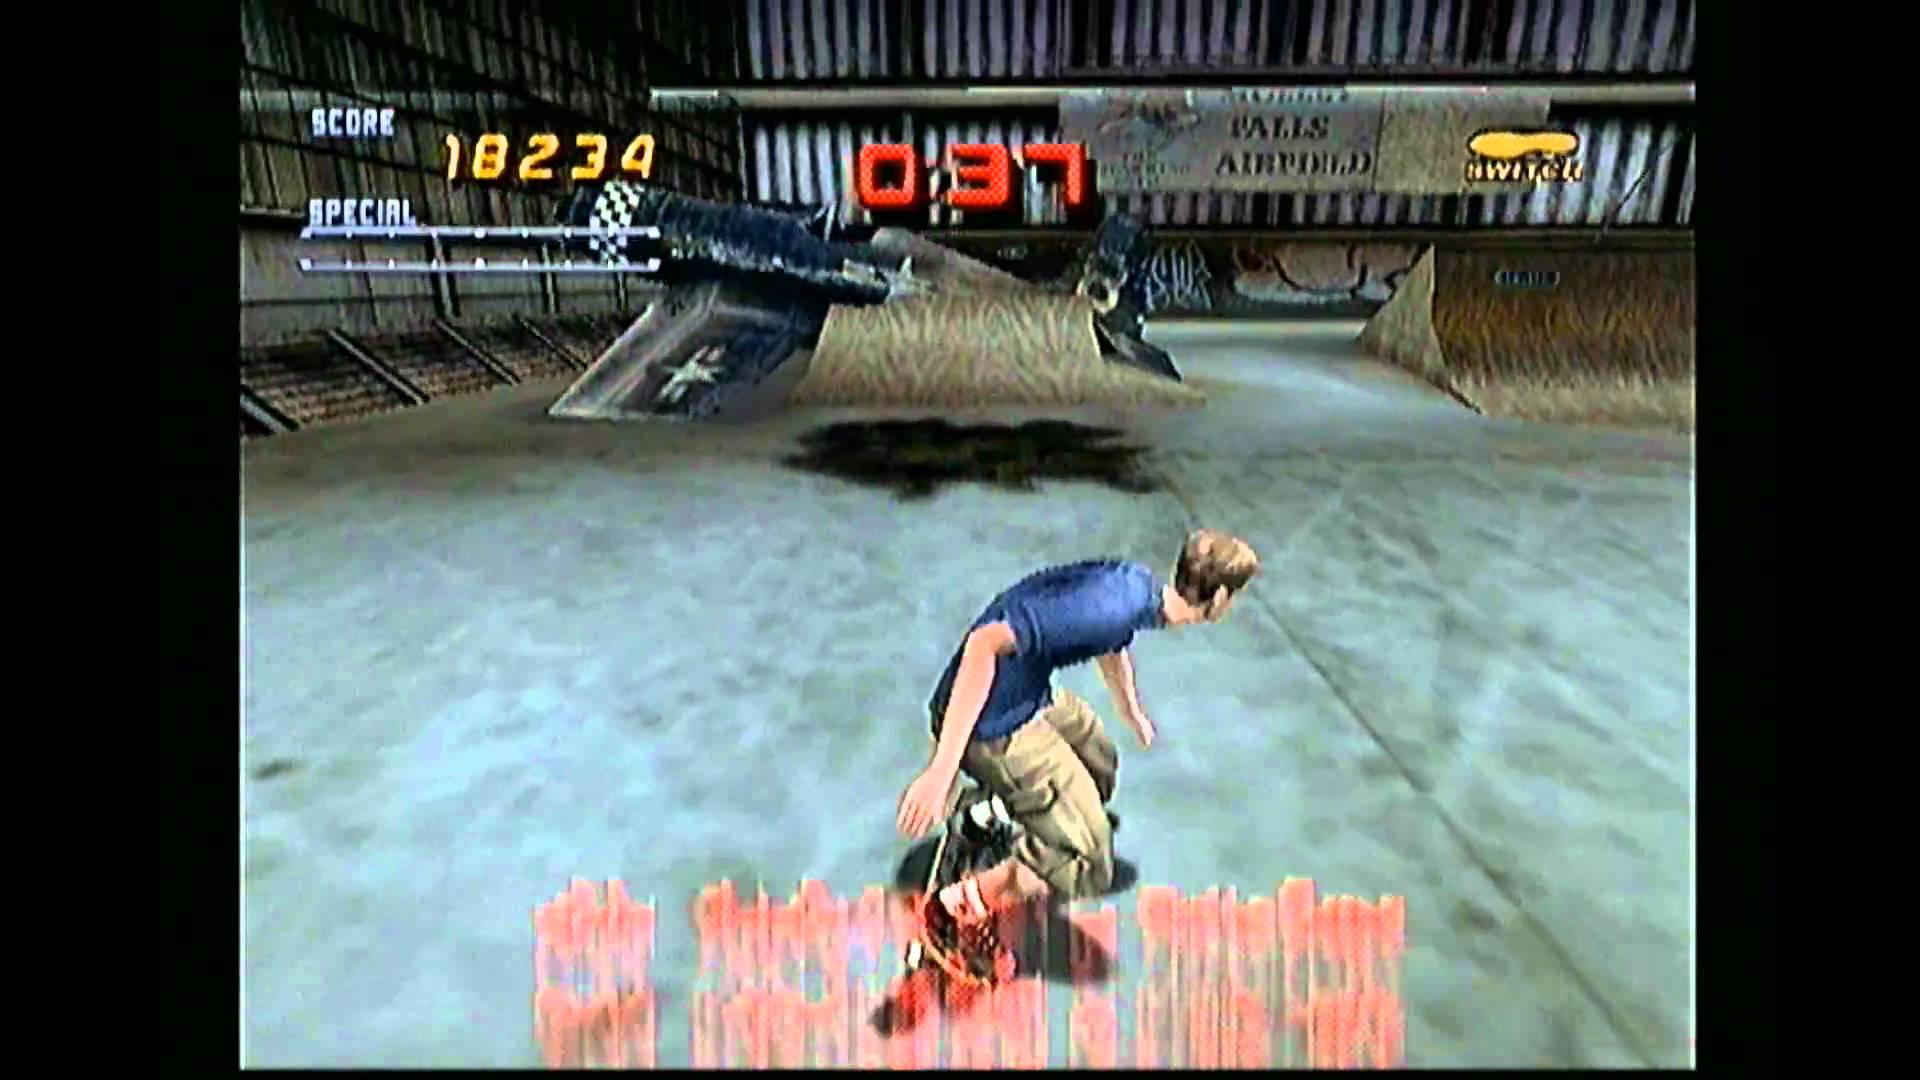 Tony Hawk's Pro Skater 2 Pics, Video Game Collection